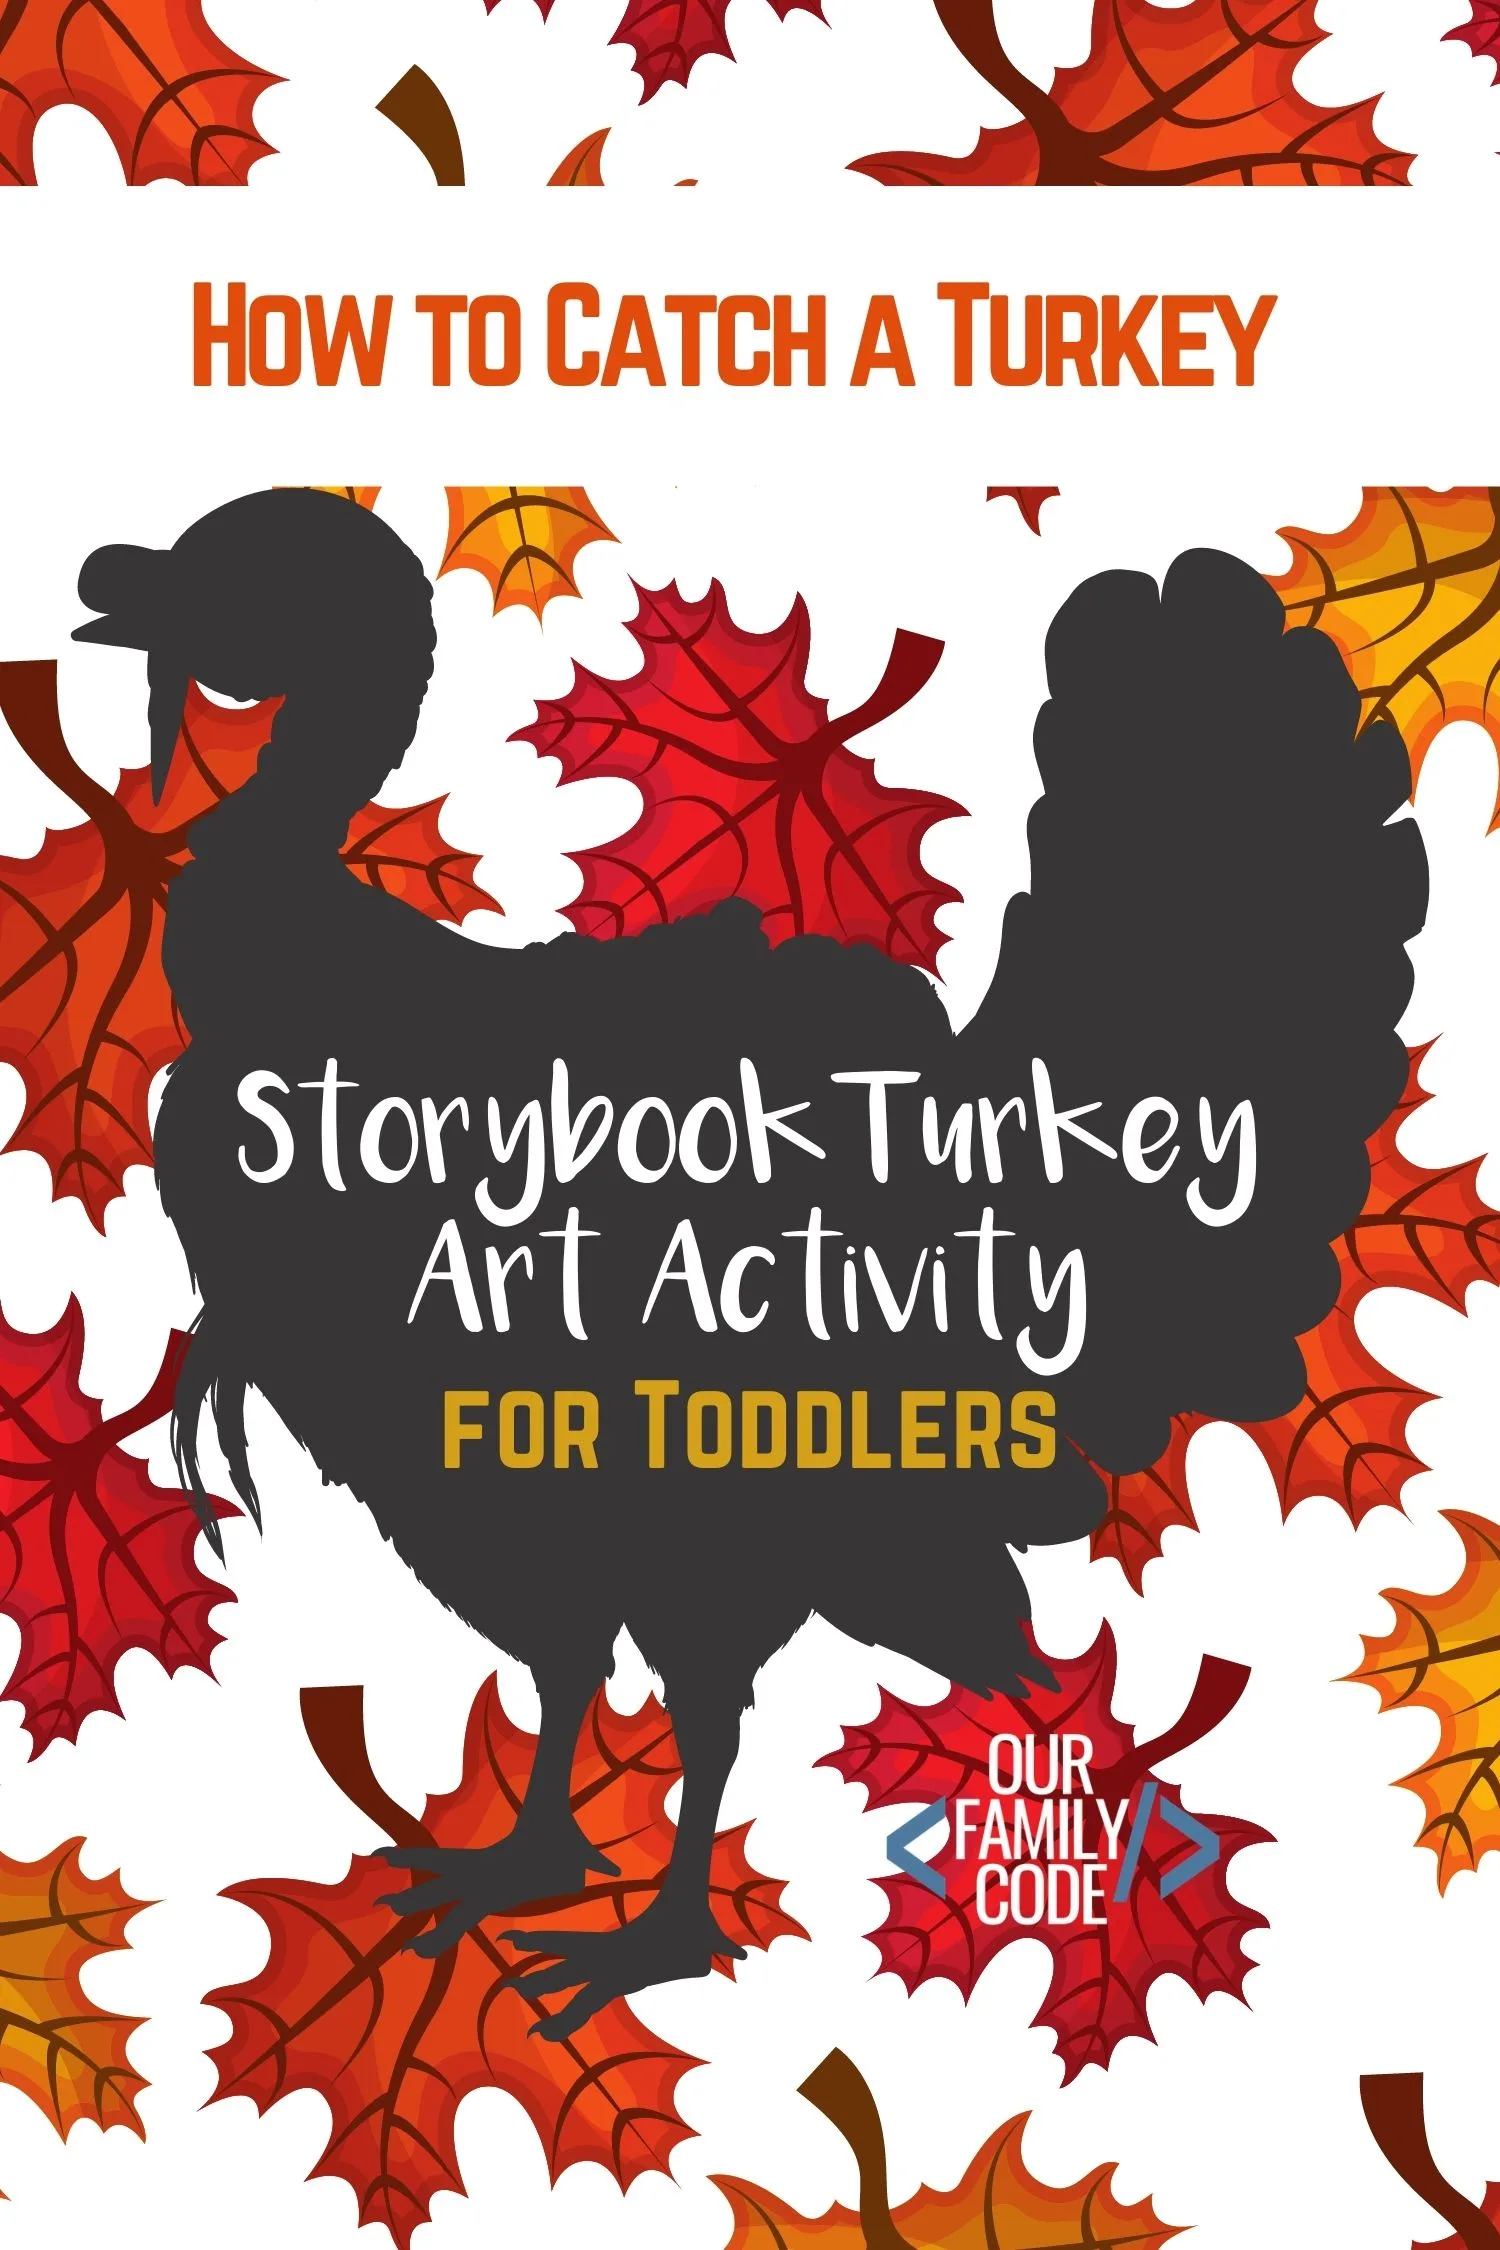 This storybook toddler turkey art activity is a great way to incorporate a fun book with art, work on fine motor skills, and learn about colors. #toddlercrafts #teachingtoddlers #preschoolcrafts #Thanksgivingcraft #toddlerart